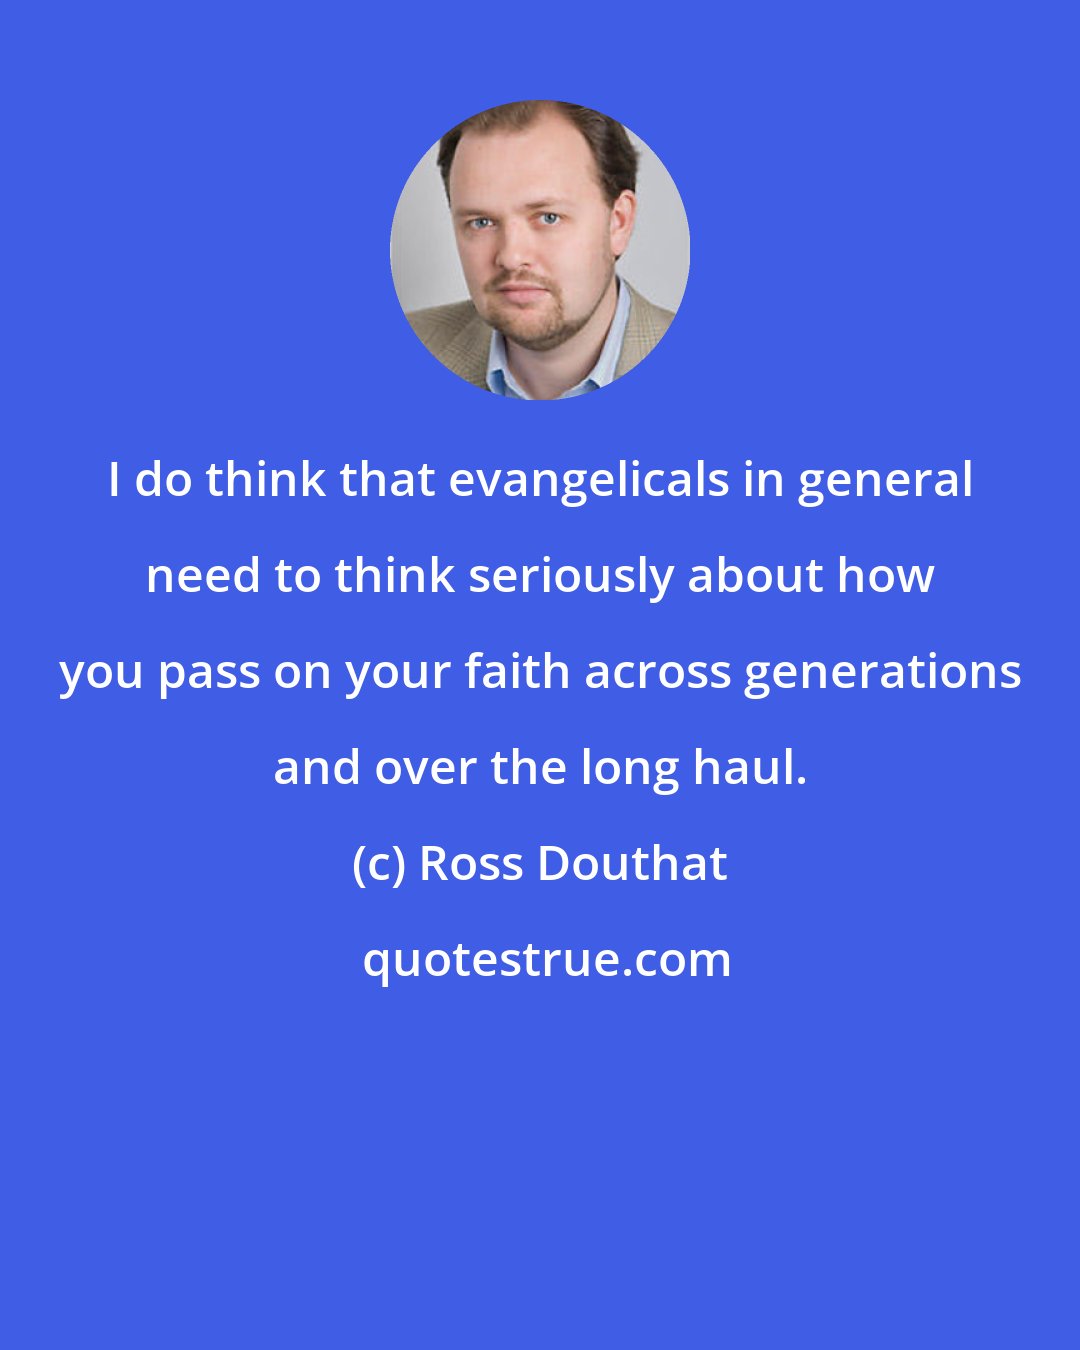 Ross Douthat: I do think that evangelicals in general need to think seriously about how you pass on your faith across generations and over the long haul.